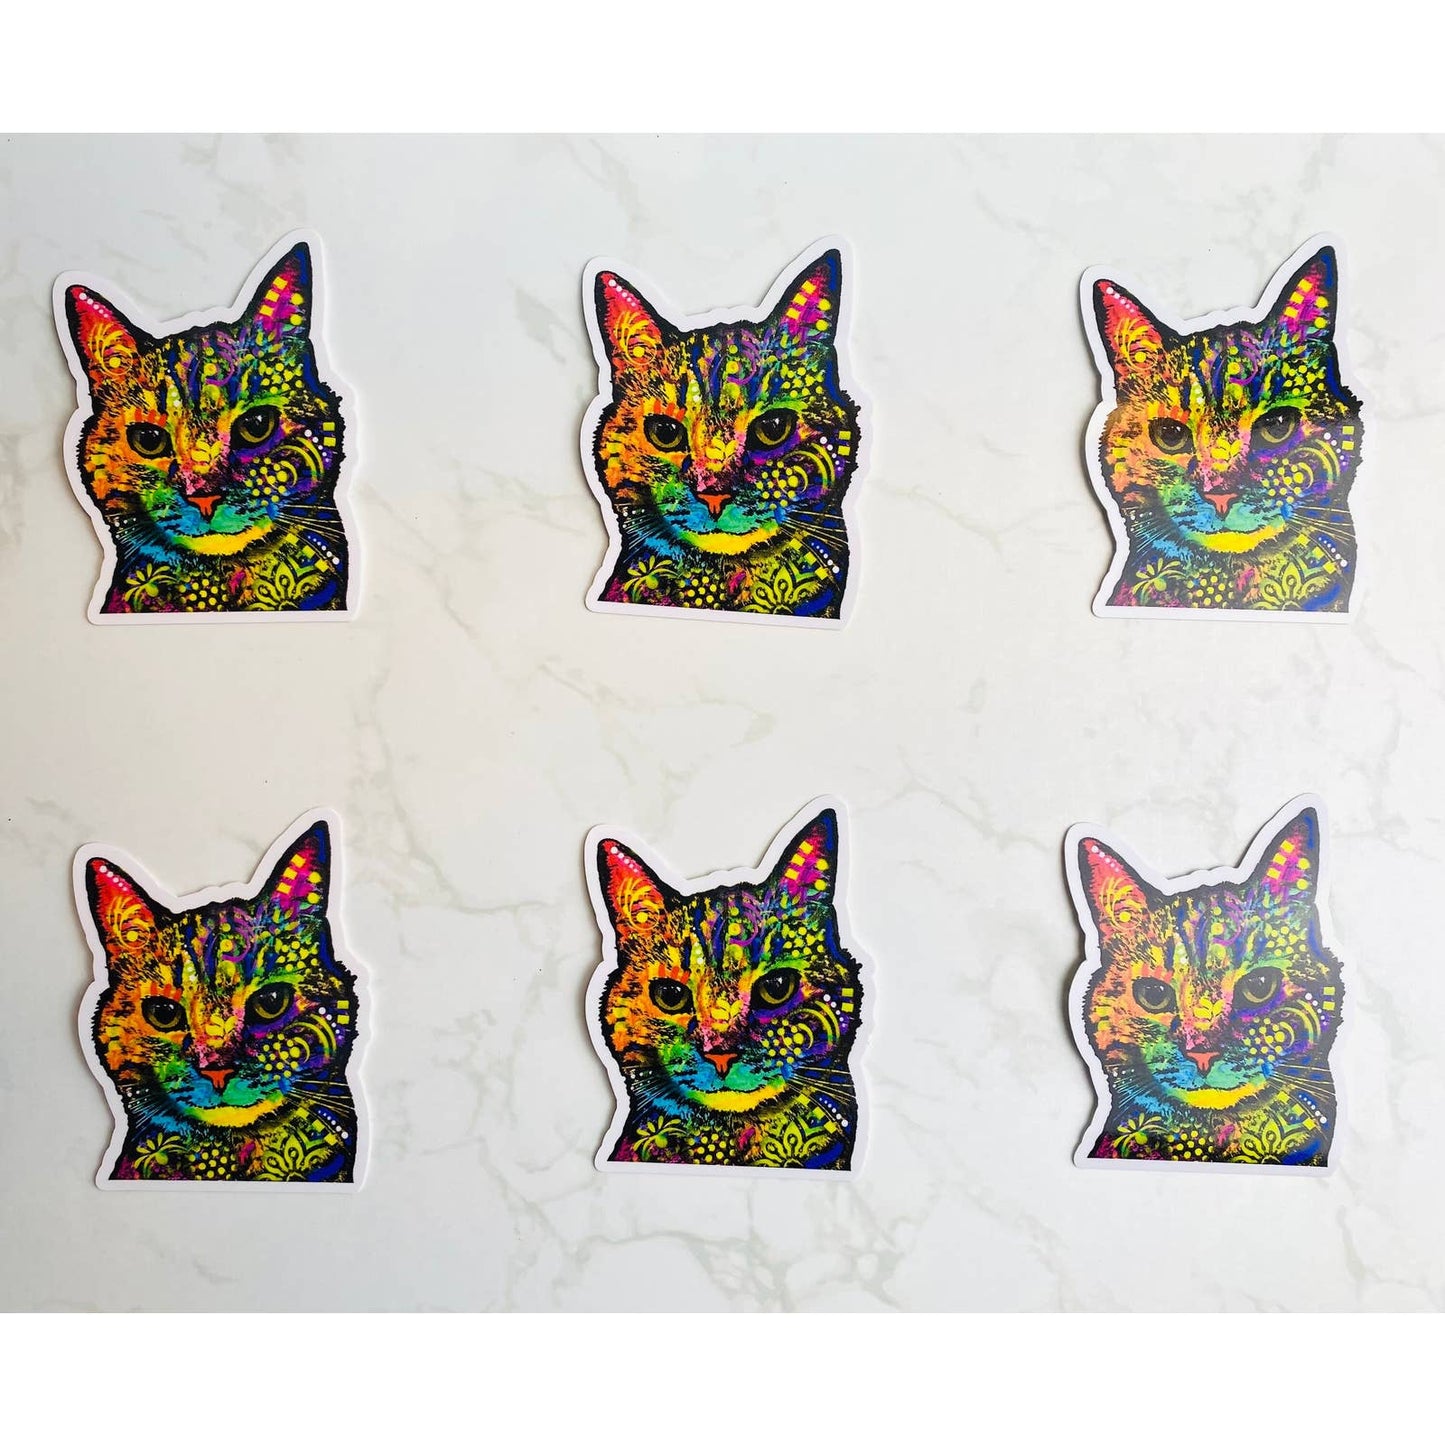 Officially Licensed Dean Russo Cat Stickers